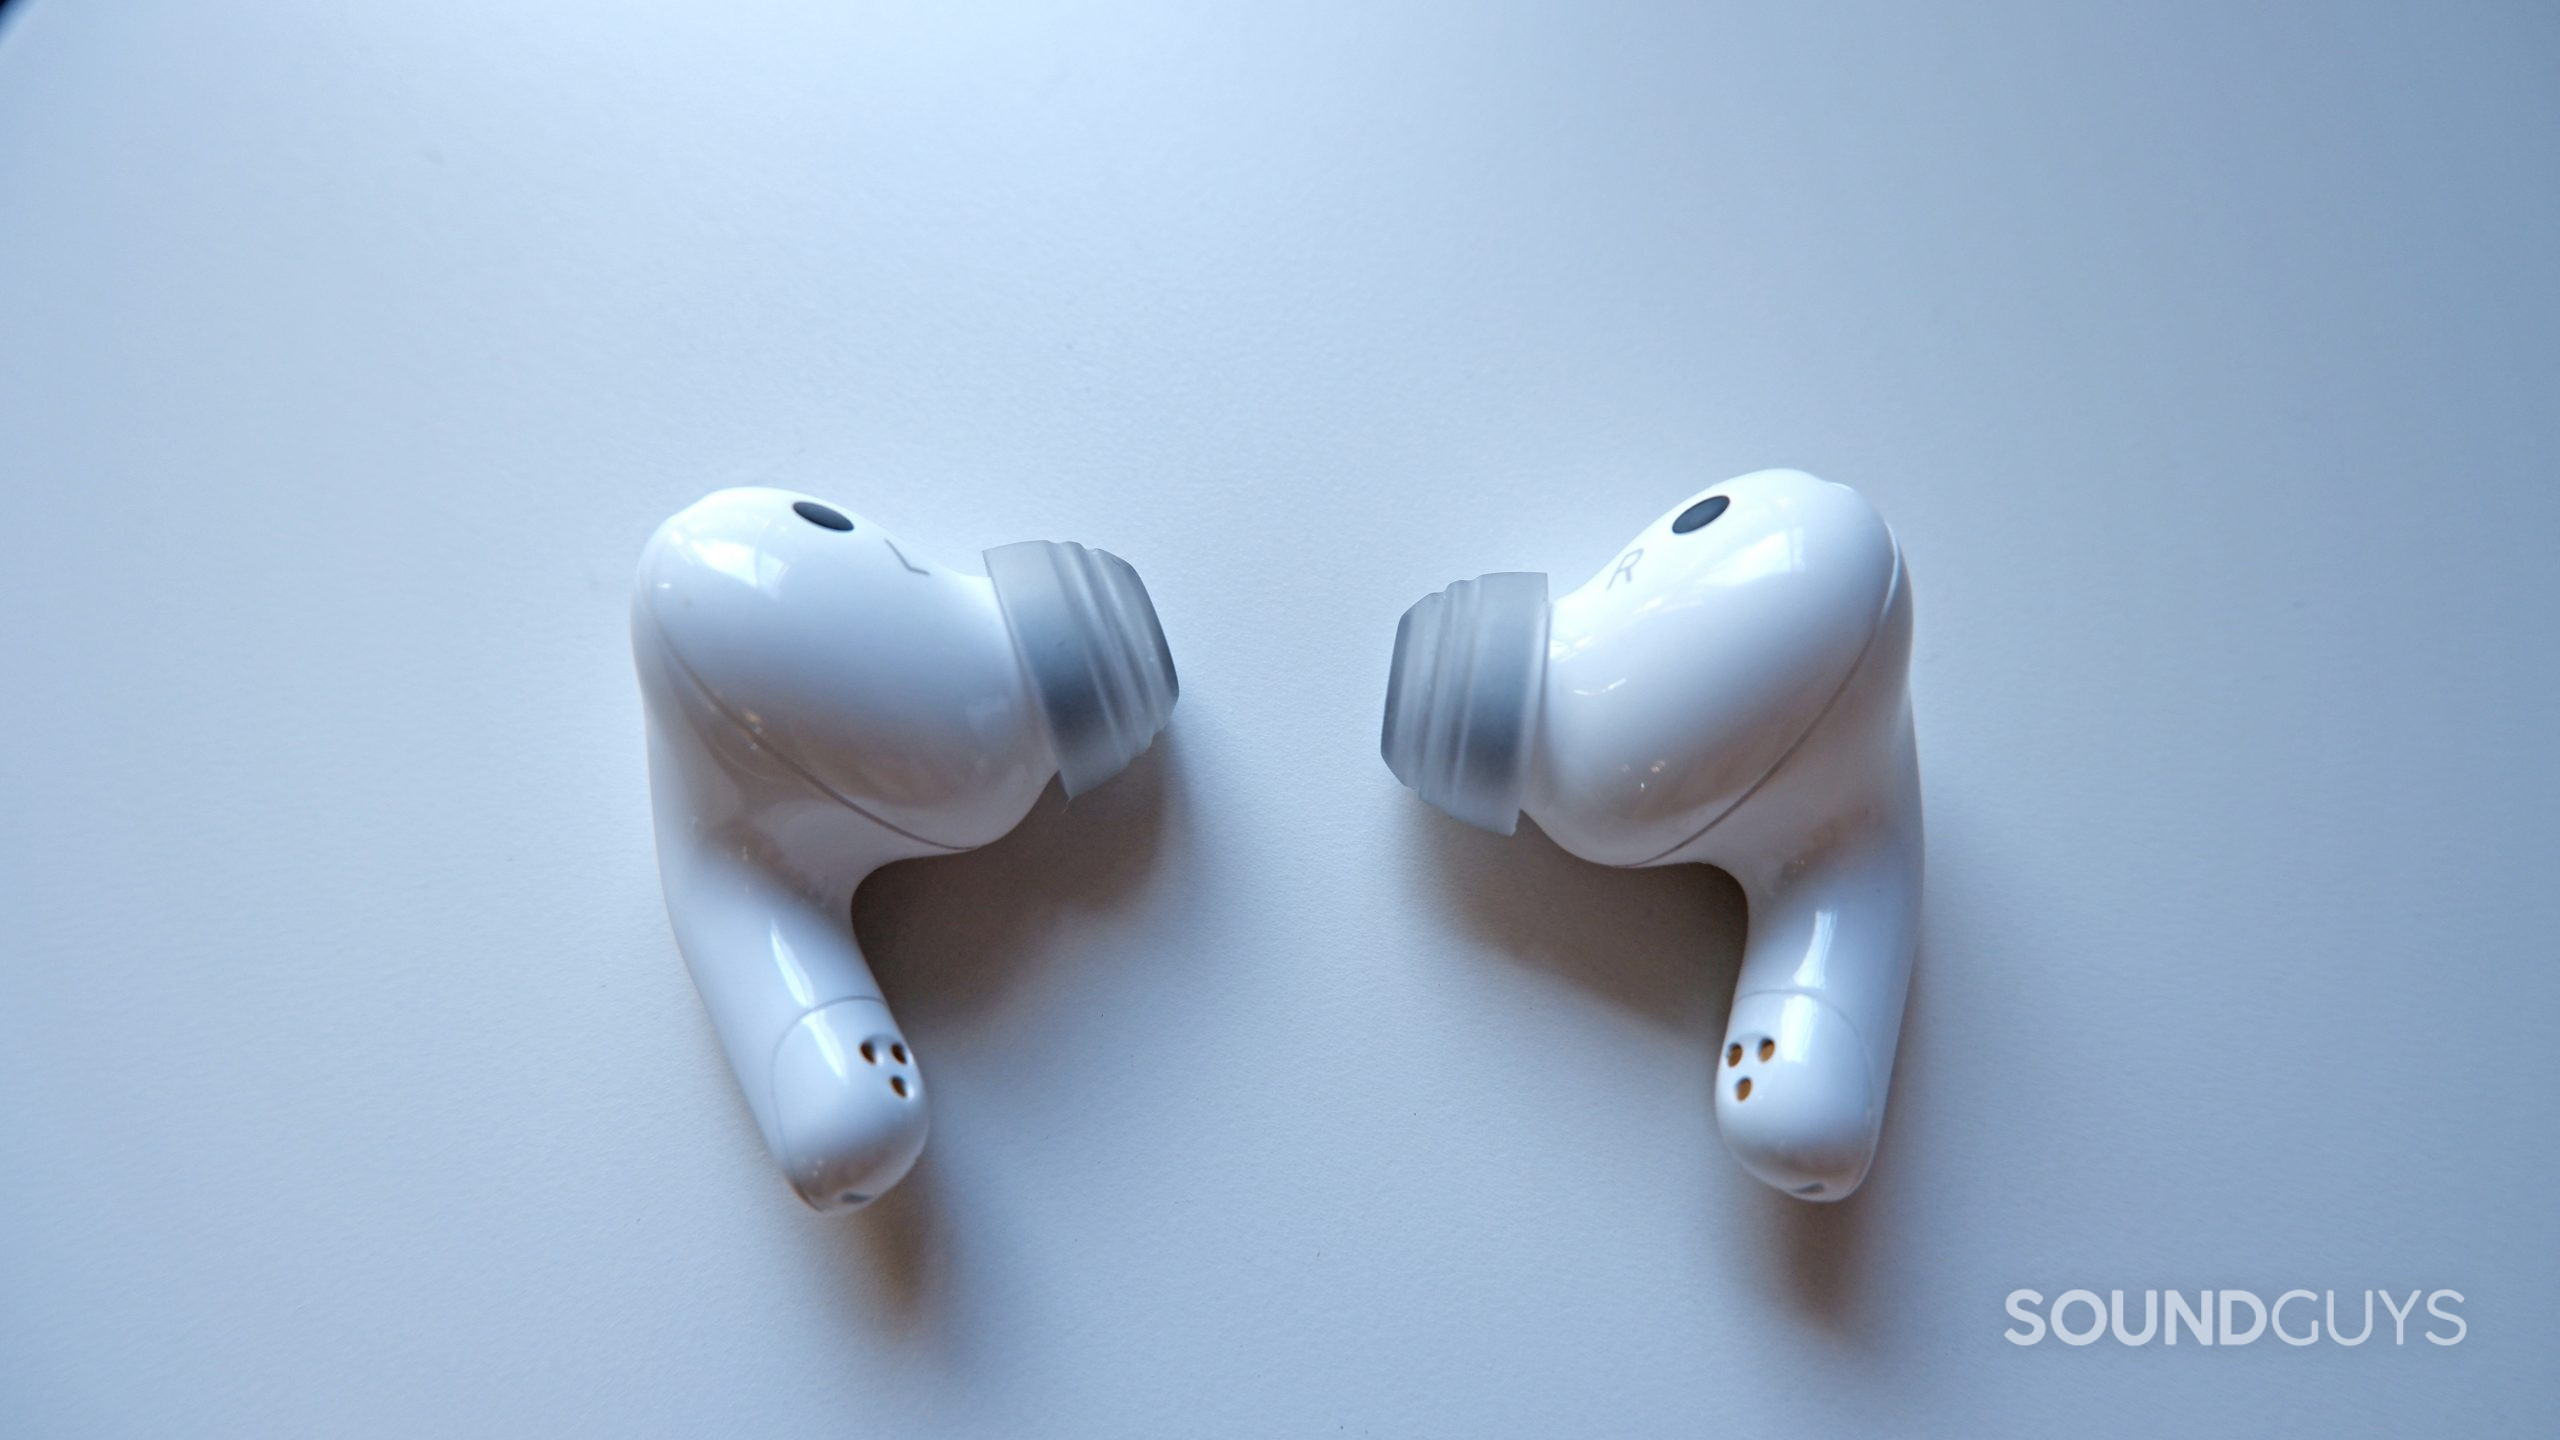 The LG TONE Free T90 earbuds side by side.